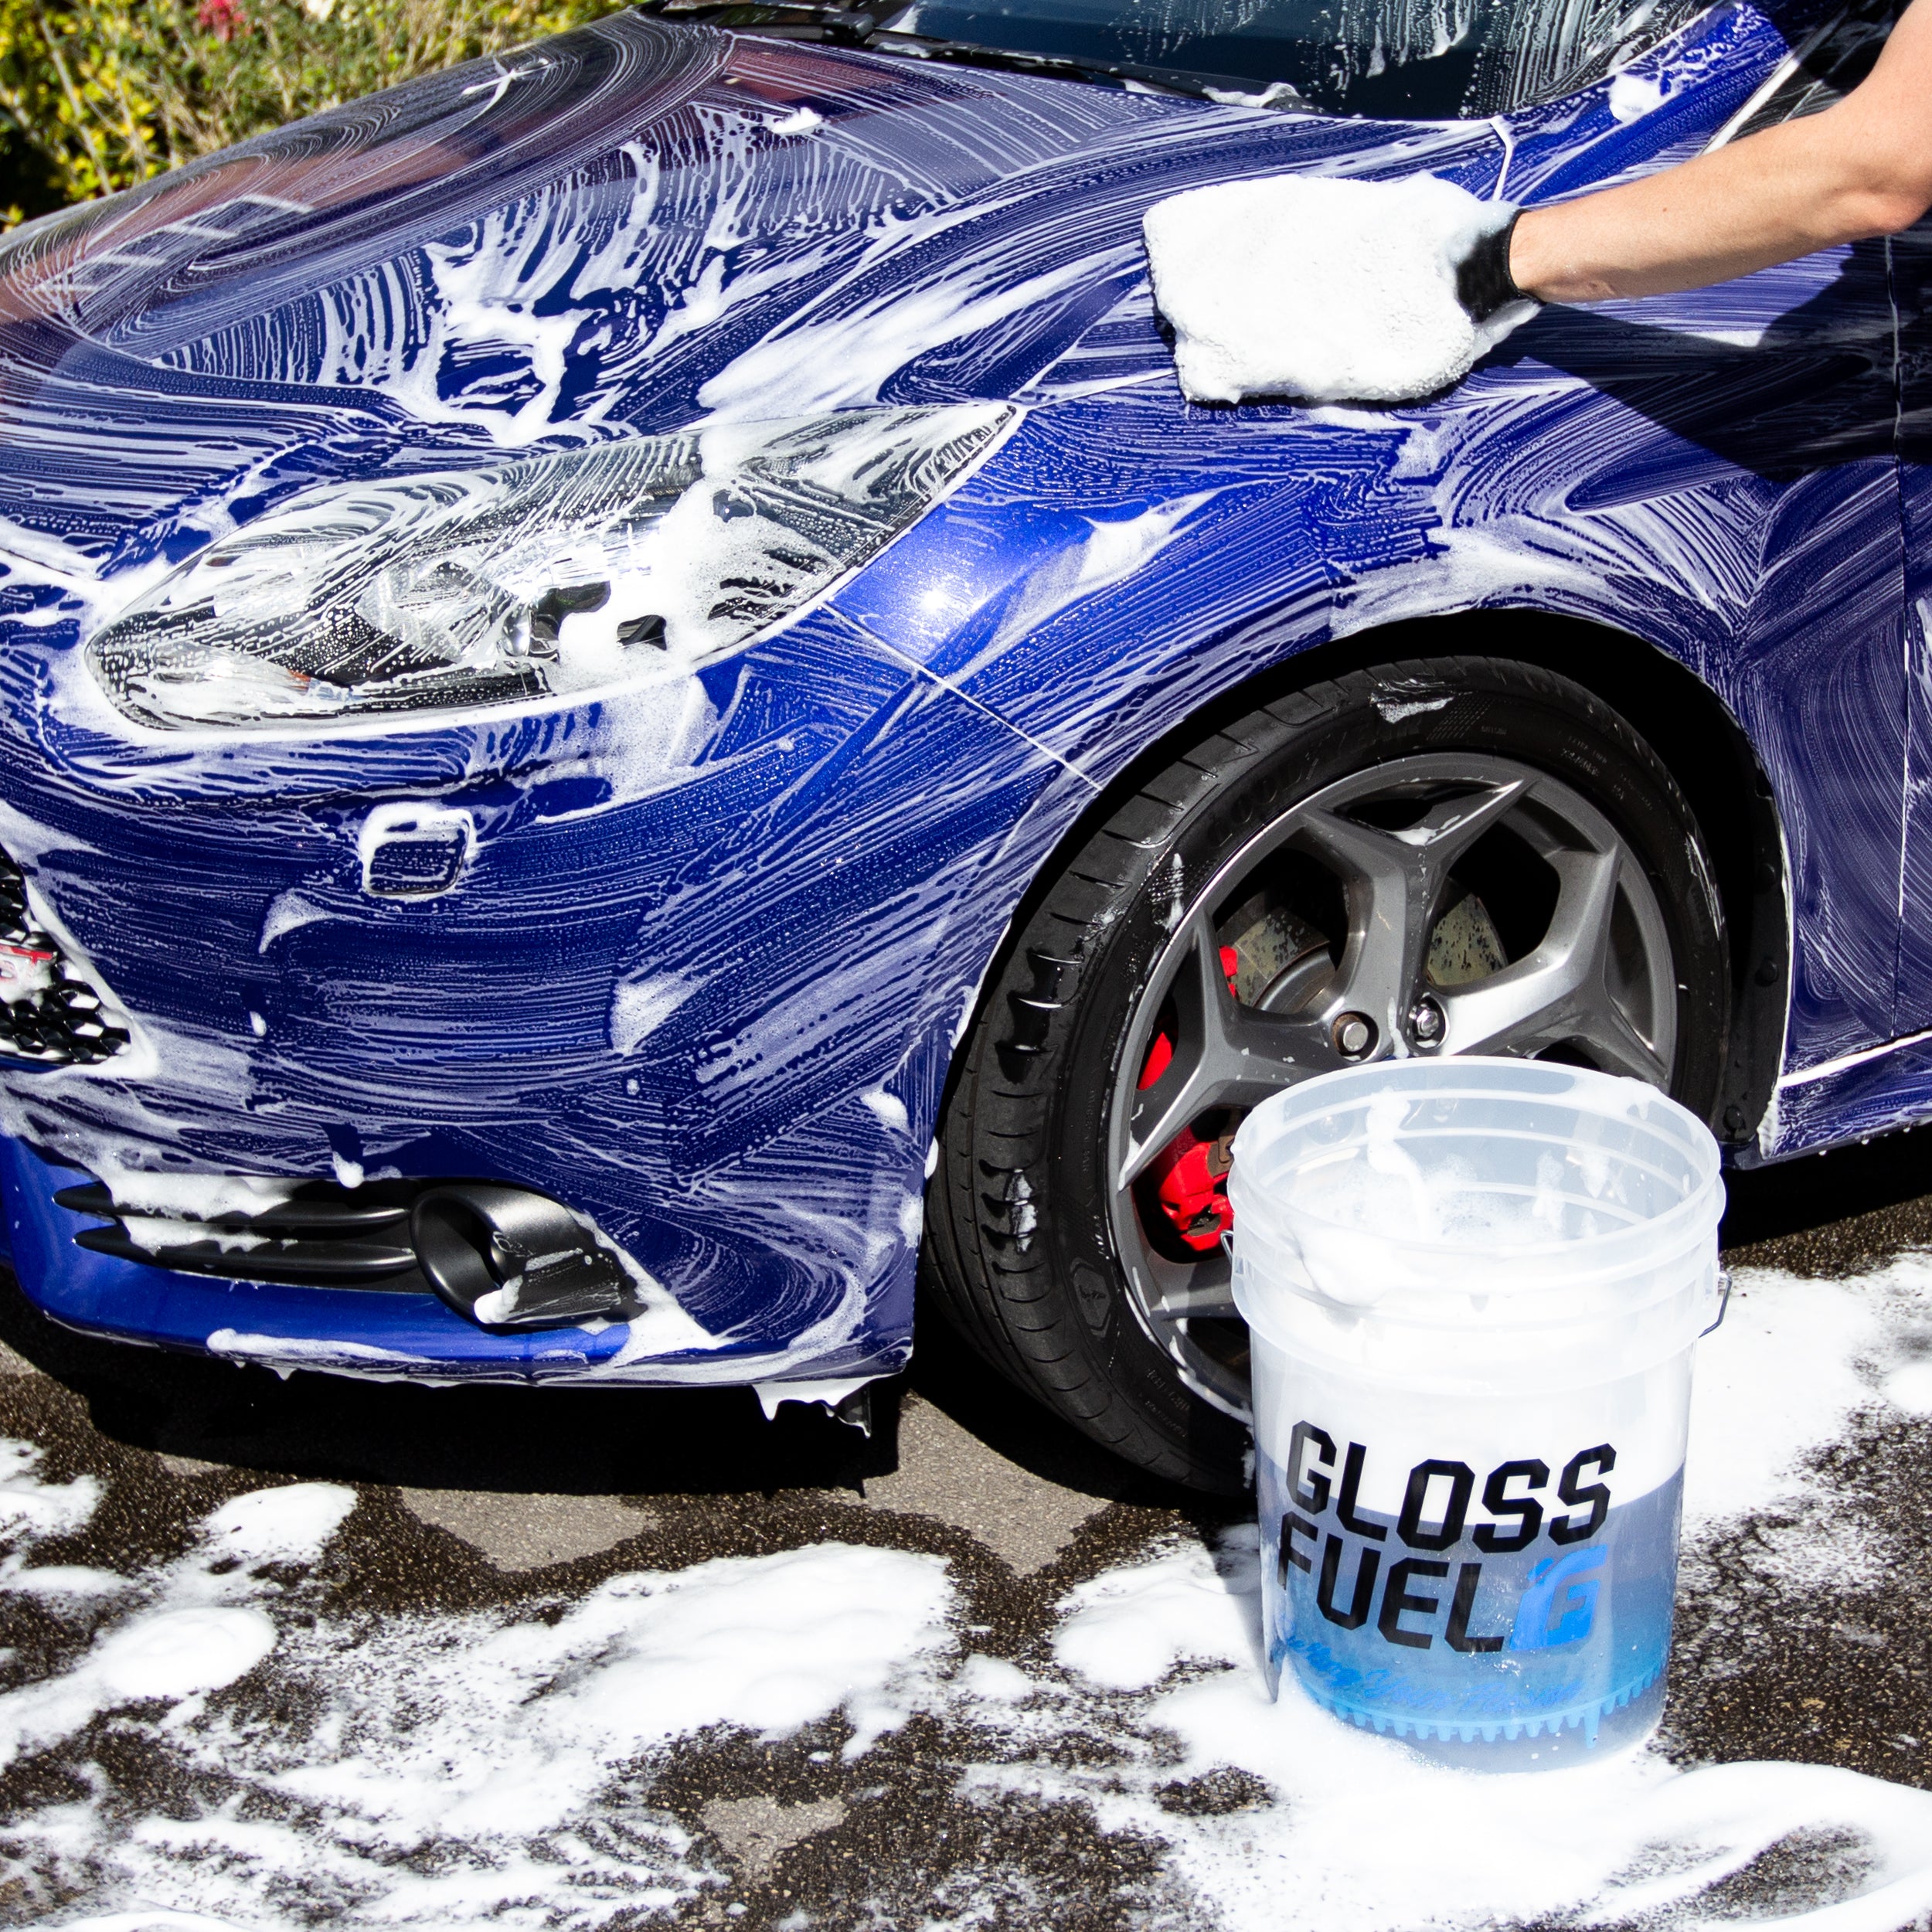 Gloss Fuel Gloss Enhancing Car Shampoo - Soap Suds and Wash Mitt Cleaning a Ford Focus ST